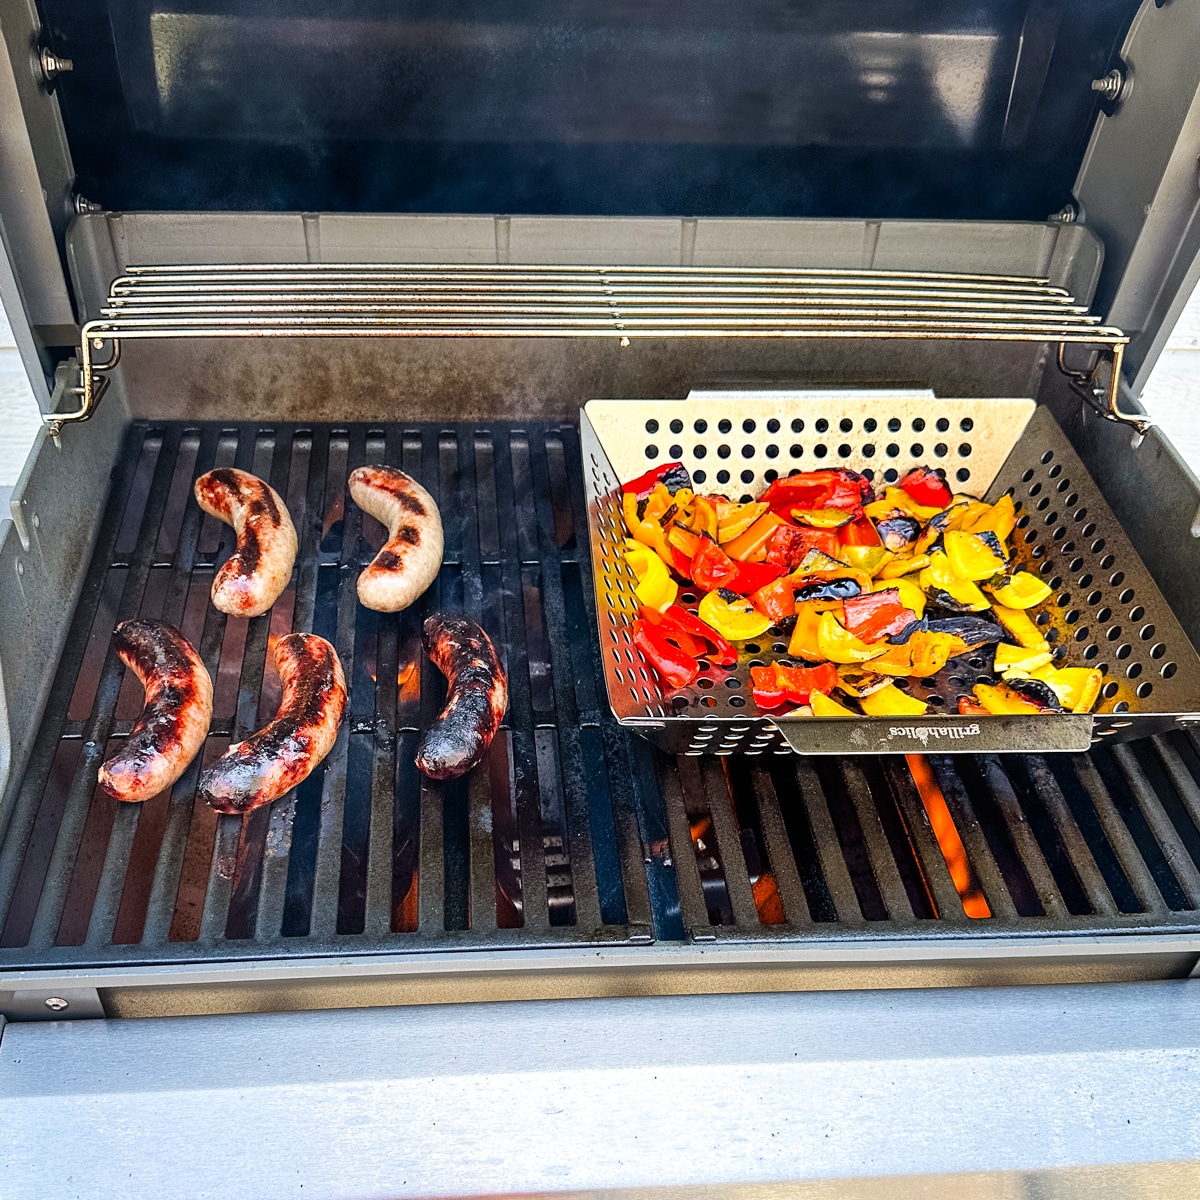 Grilled sausages and peppers on a grill.